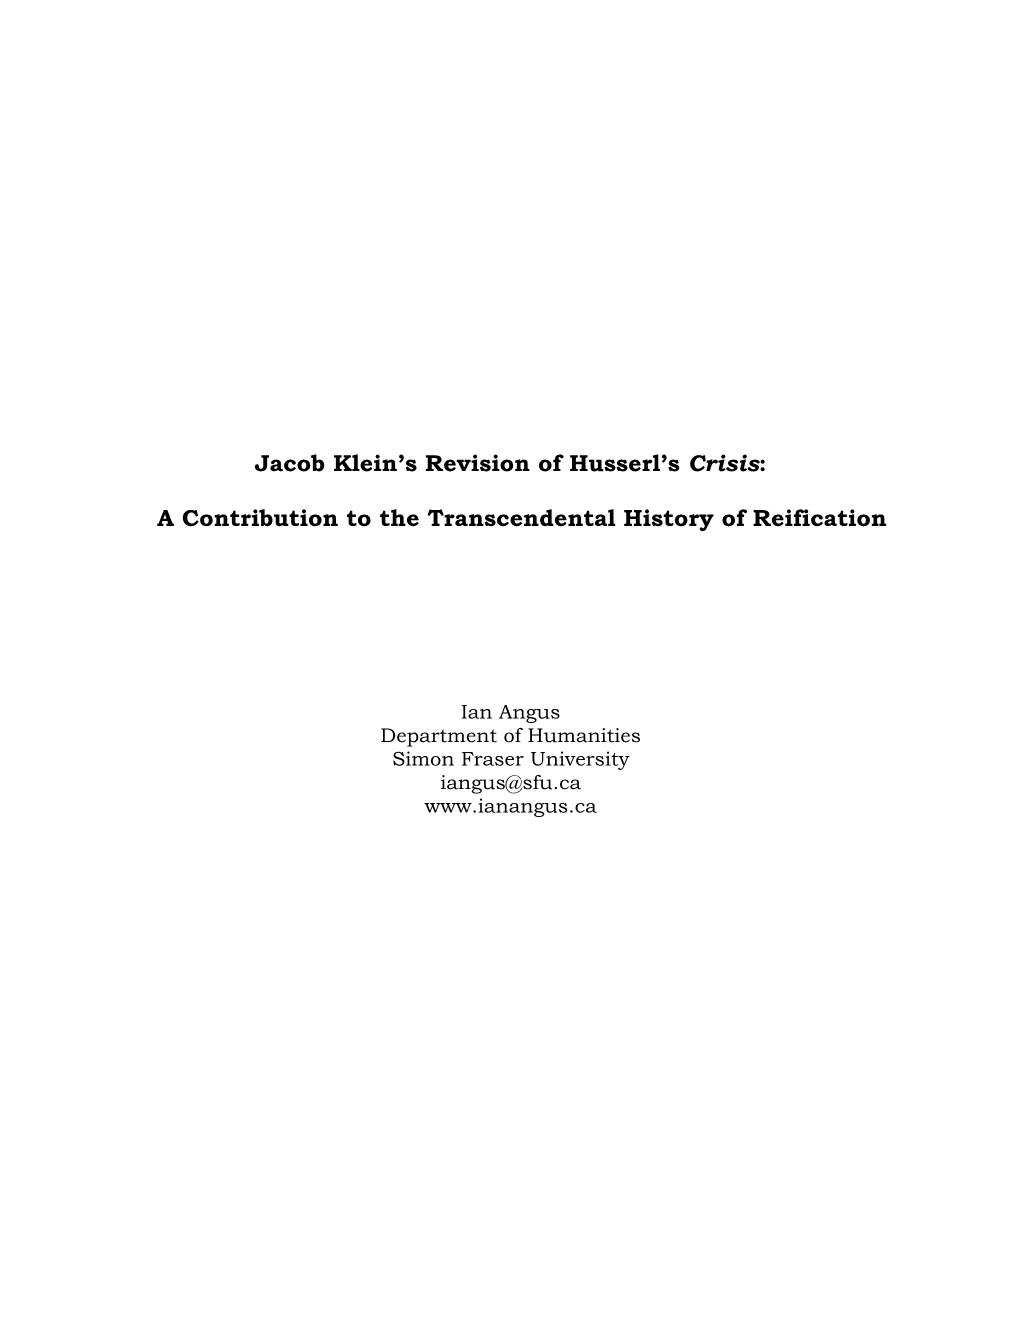 Jacob Klein's Revision of Husserl's Crisis